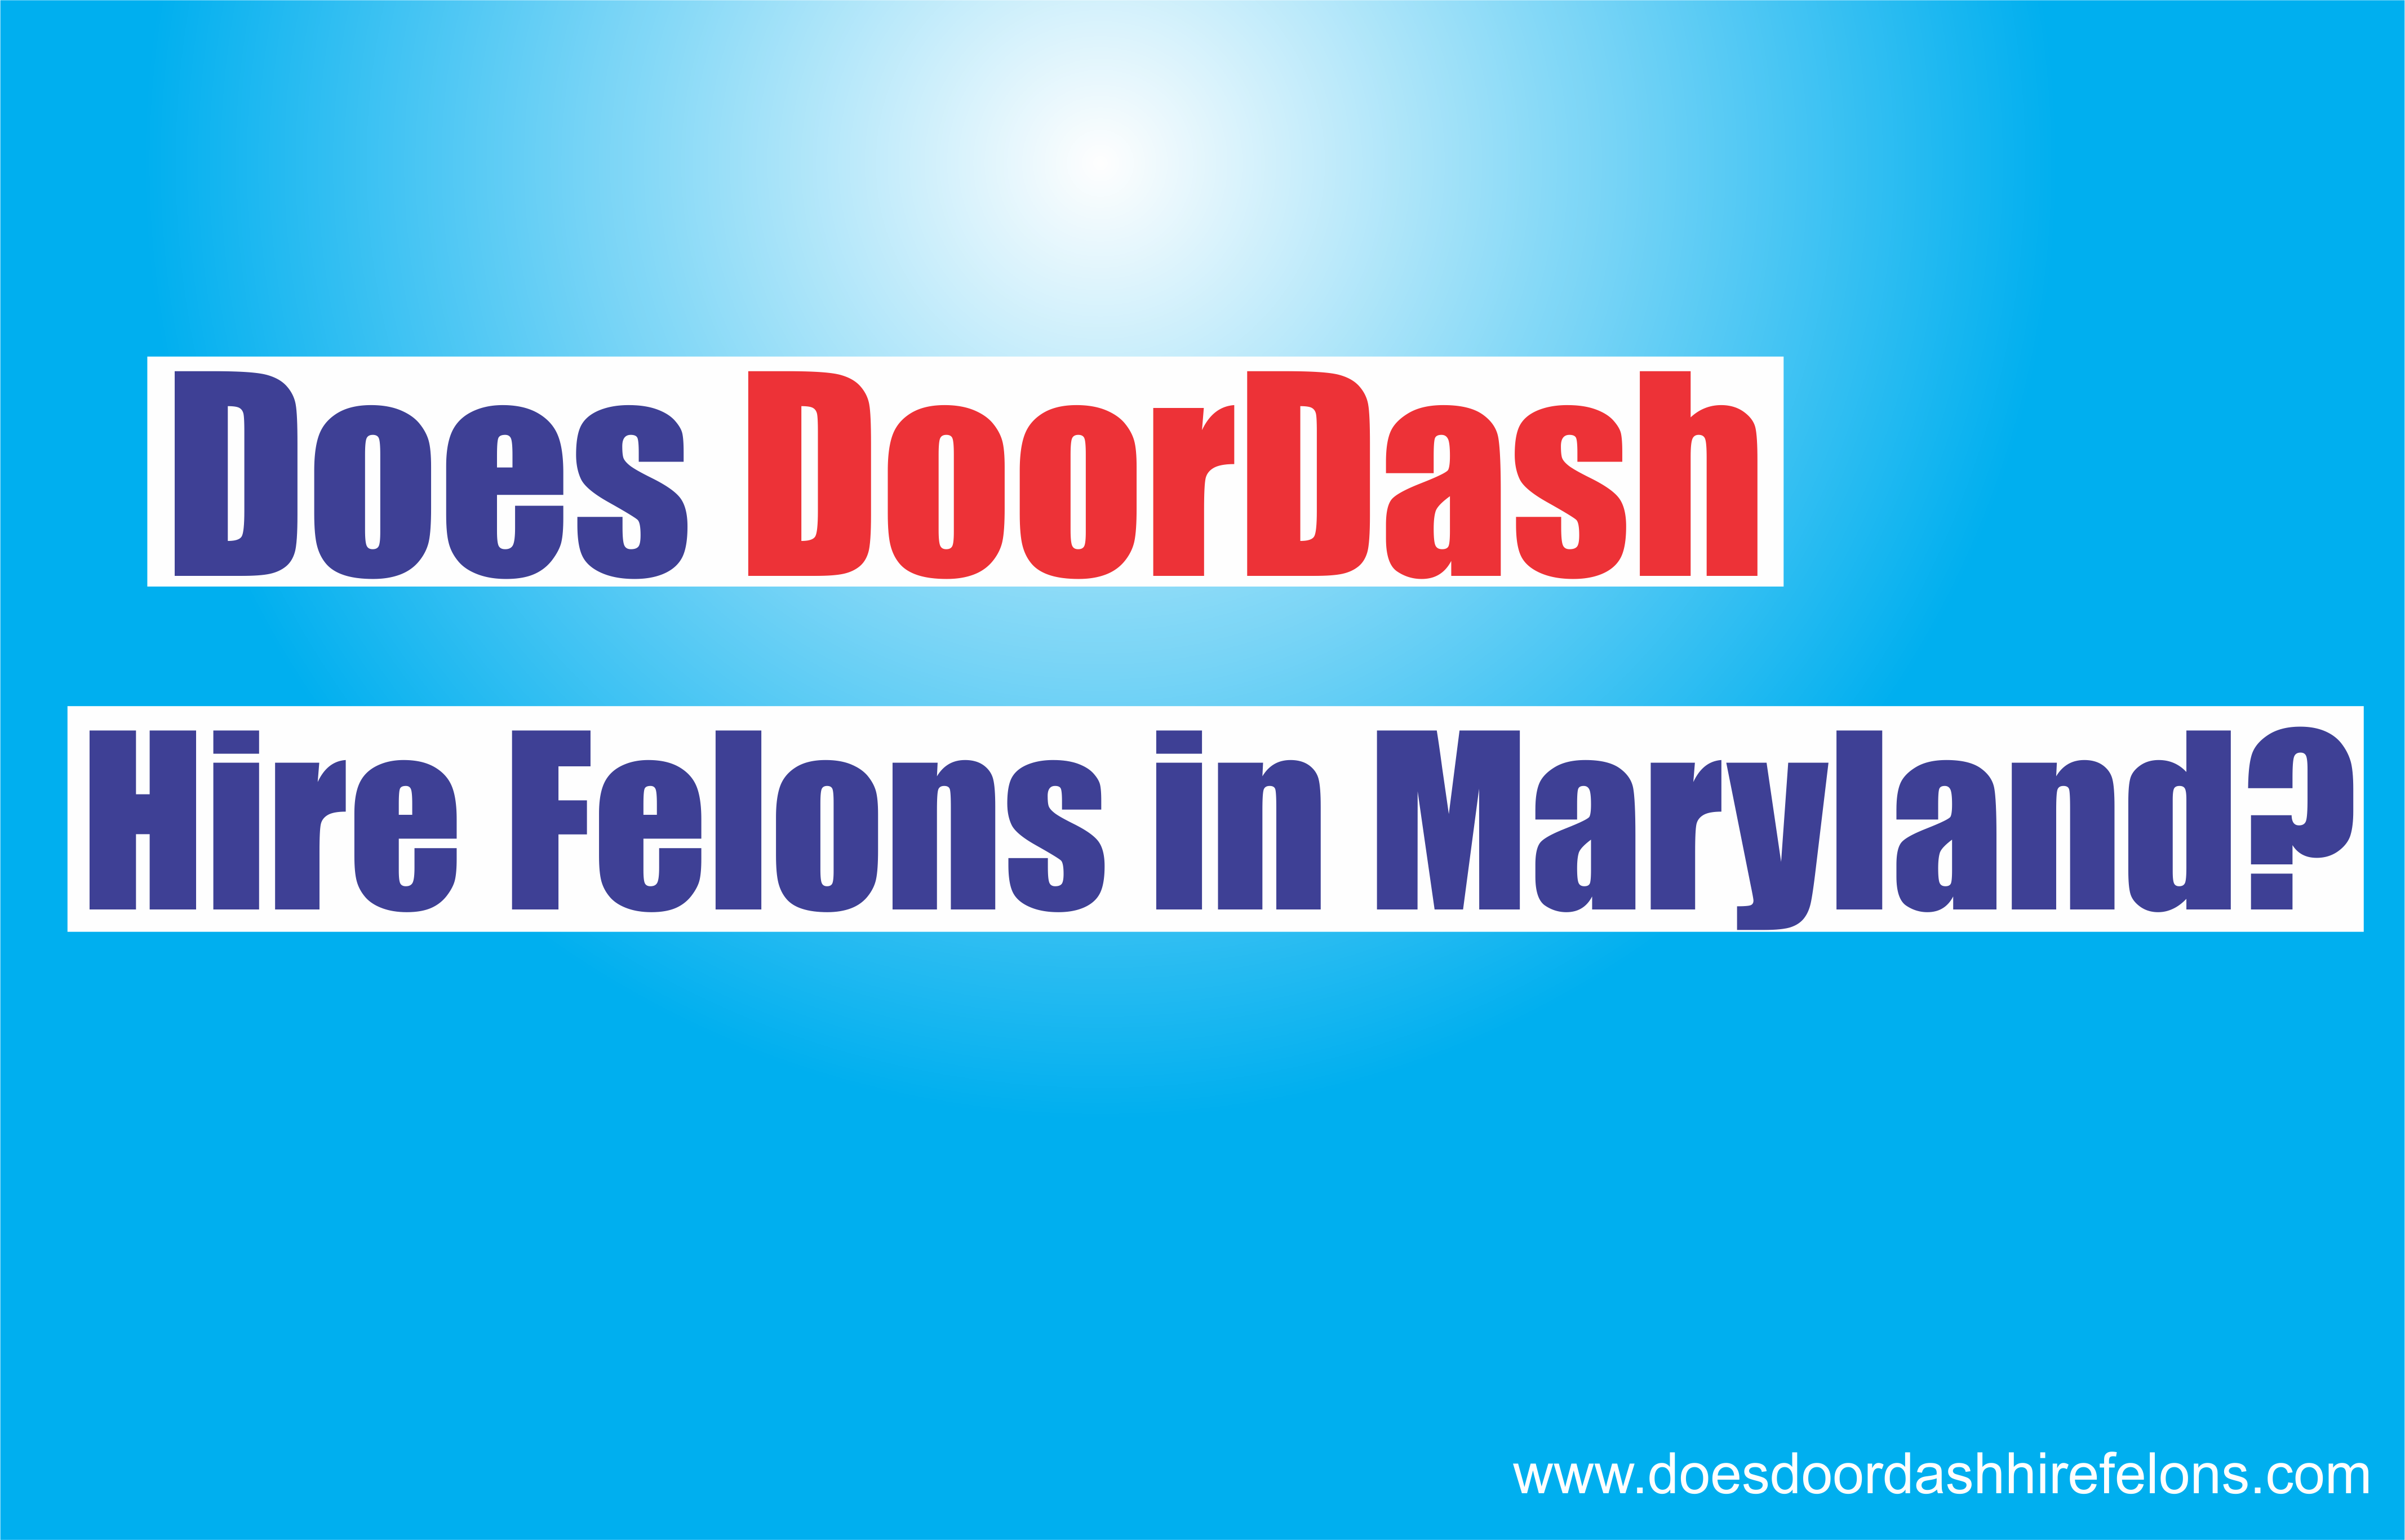 The Truth About DoorDash Hiring Felons in Maryland